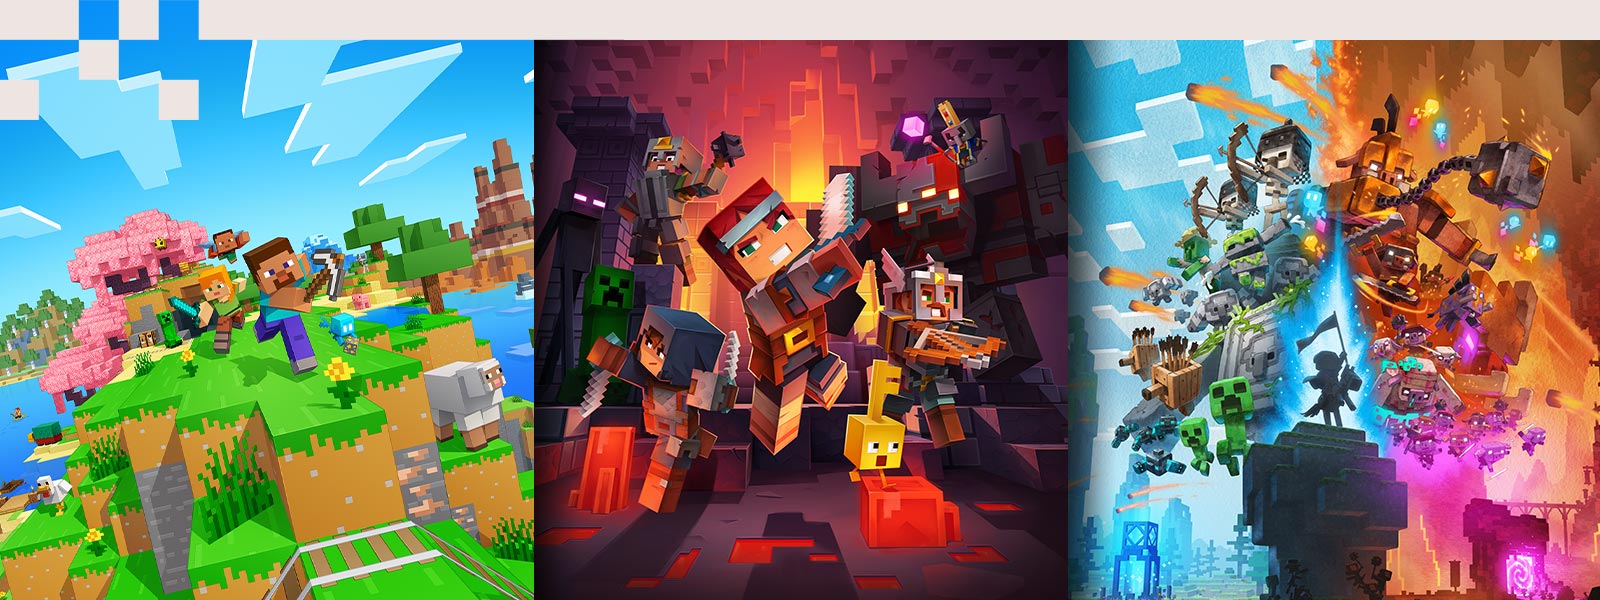 A collage of Minecraft characters from Minecraft, Minecraft Dungeons, and Minecraft Legends.